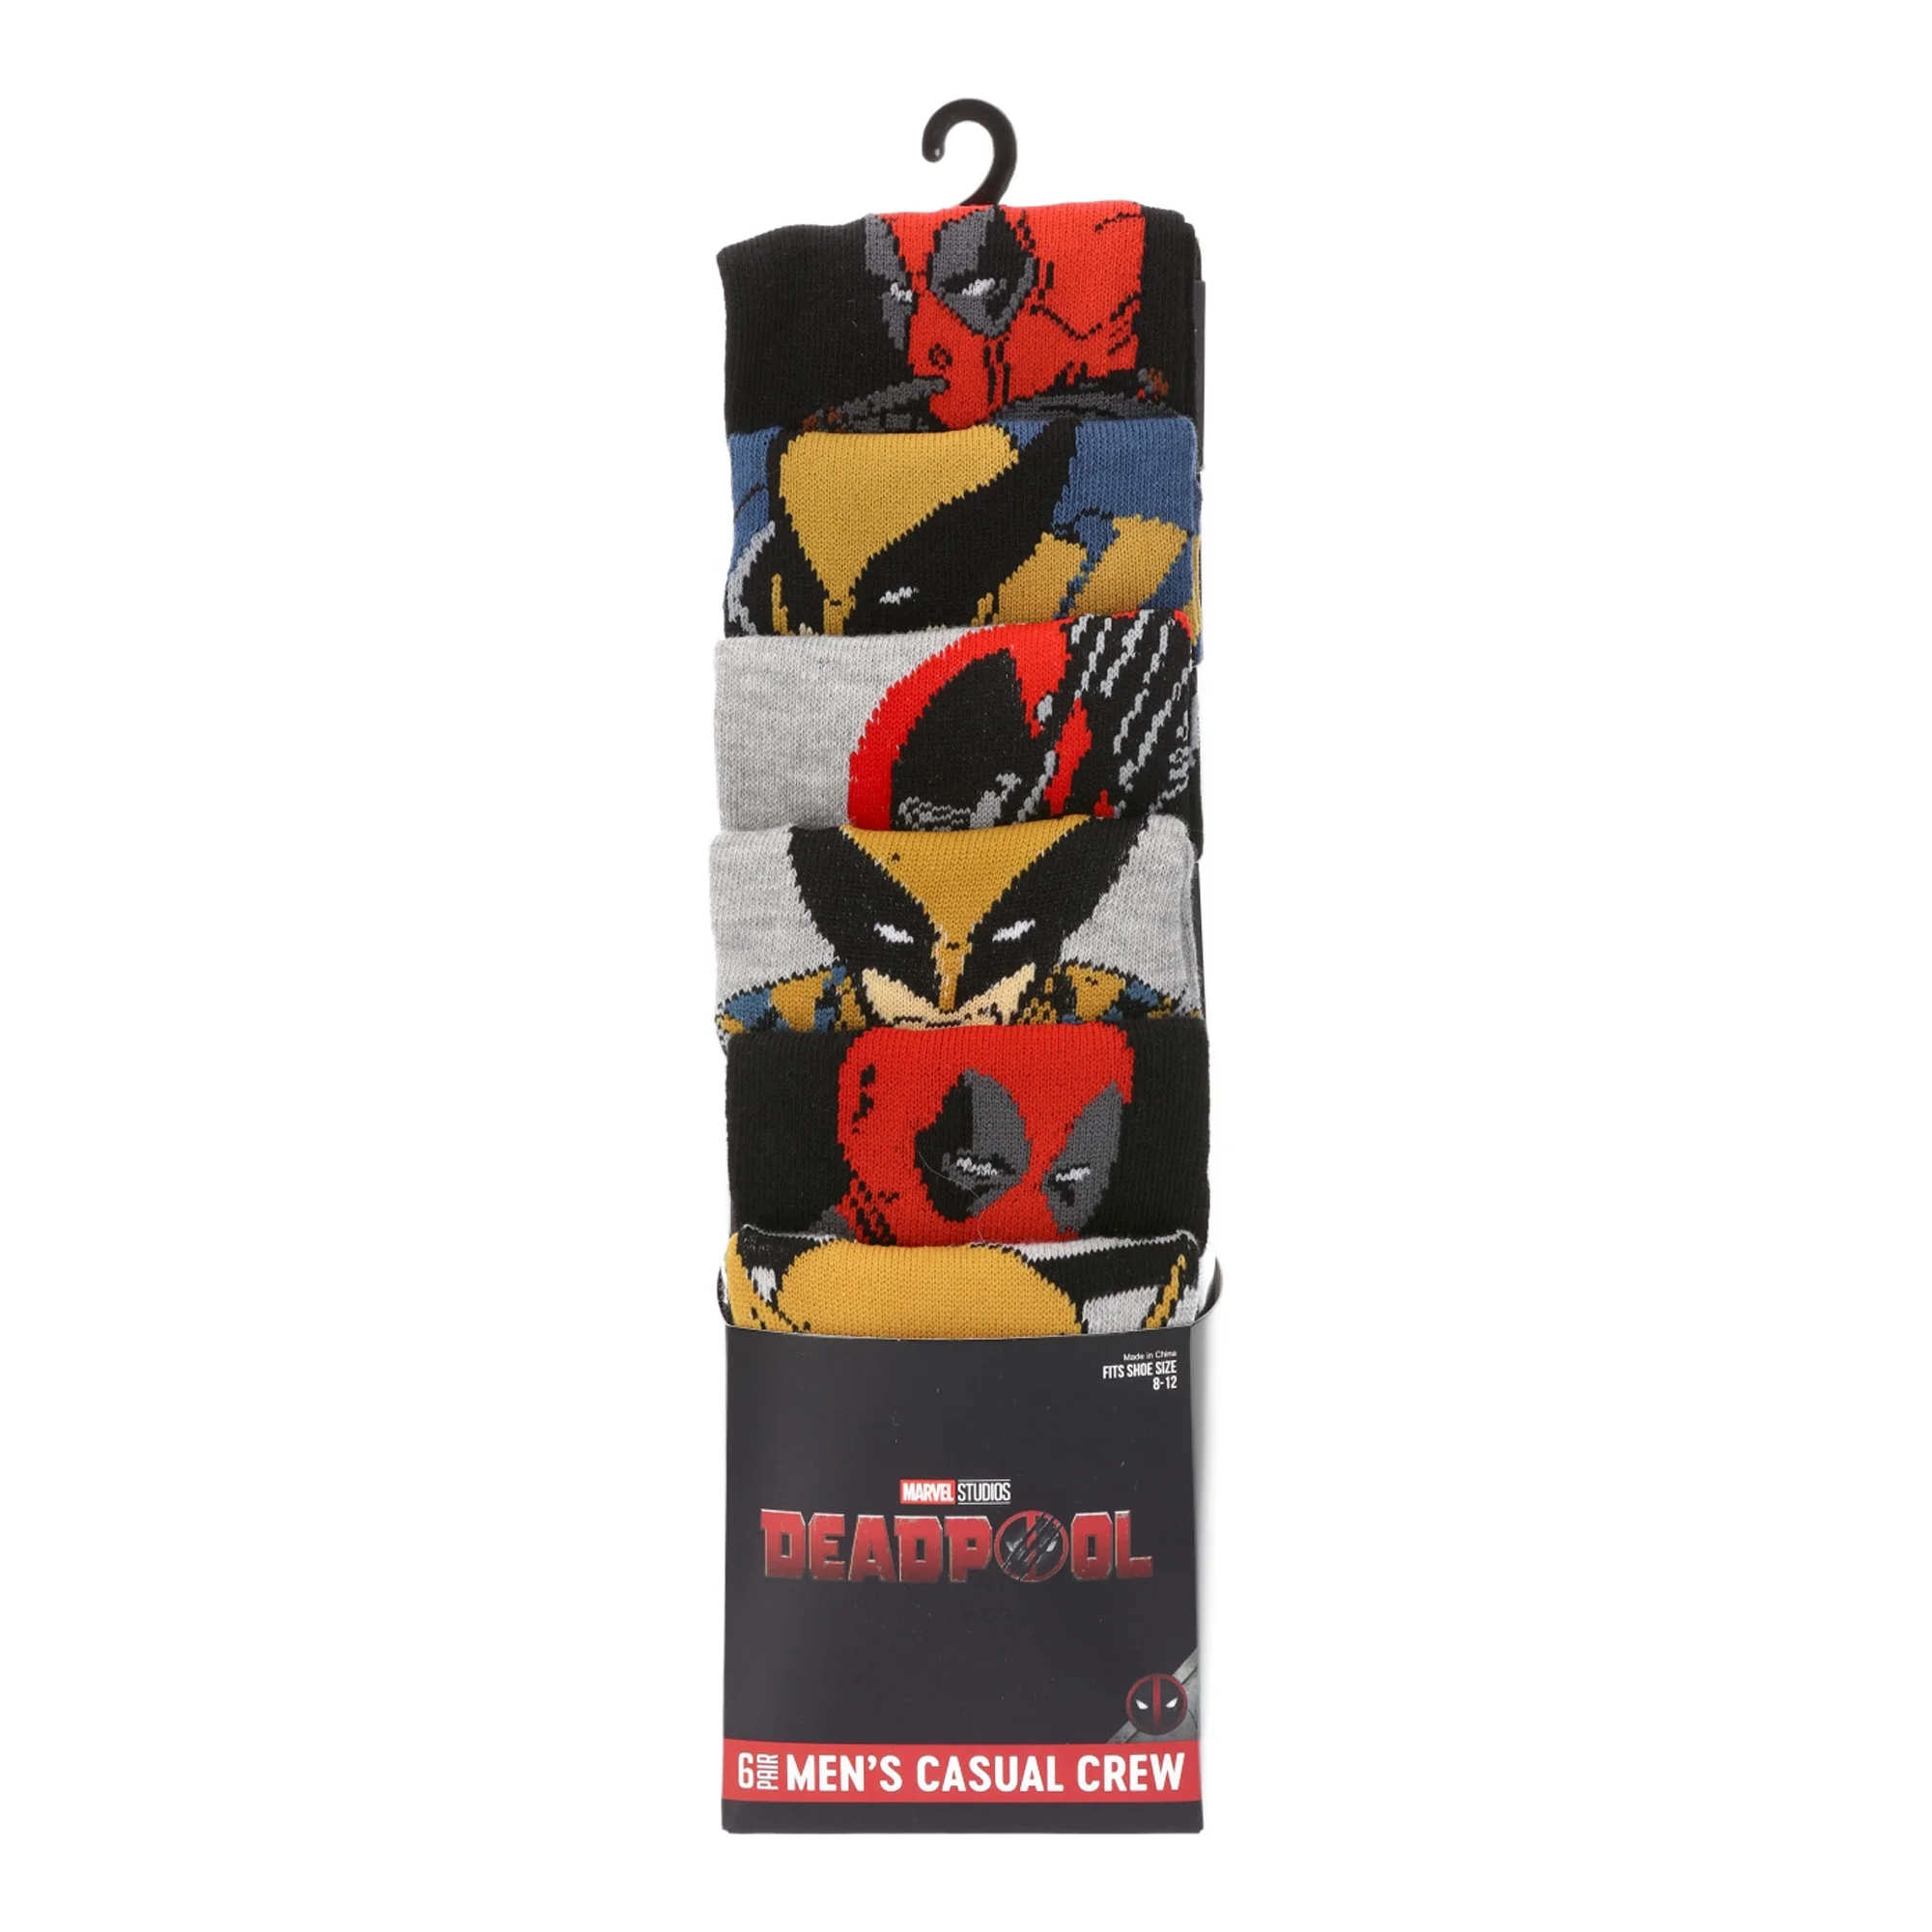 Deadpool and Wolverine's six-pack of socks.